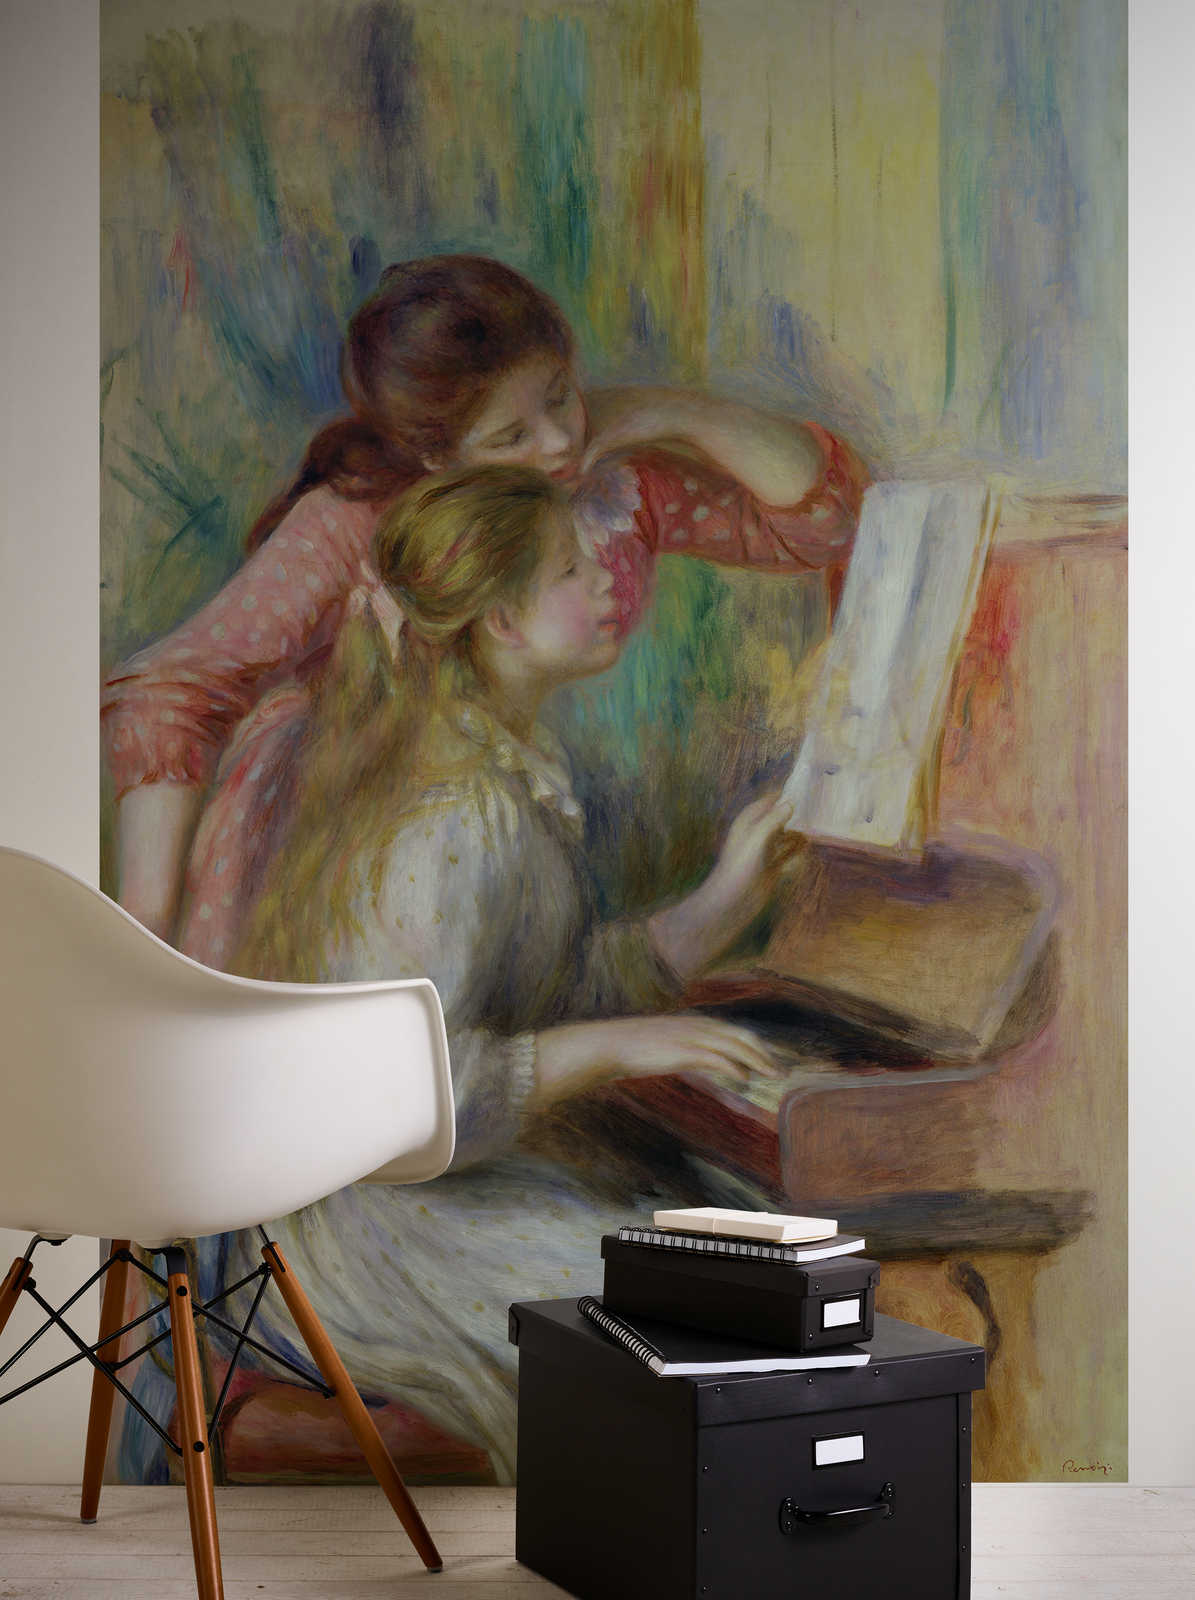             Young girl at the piano mural by Pierre Auguste Renoir
        